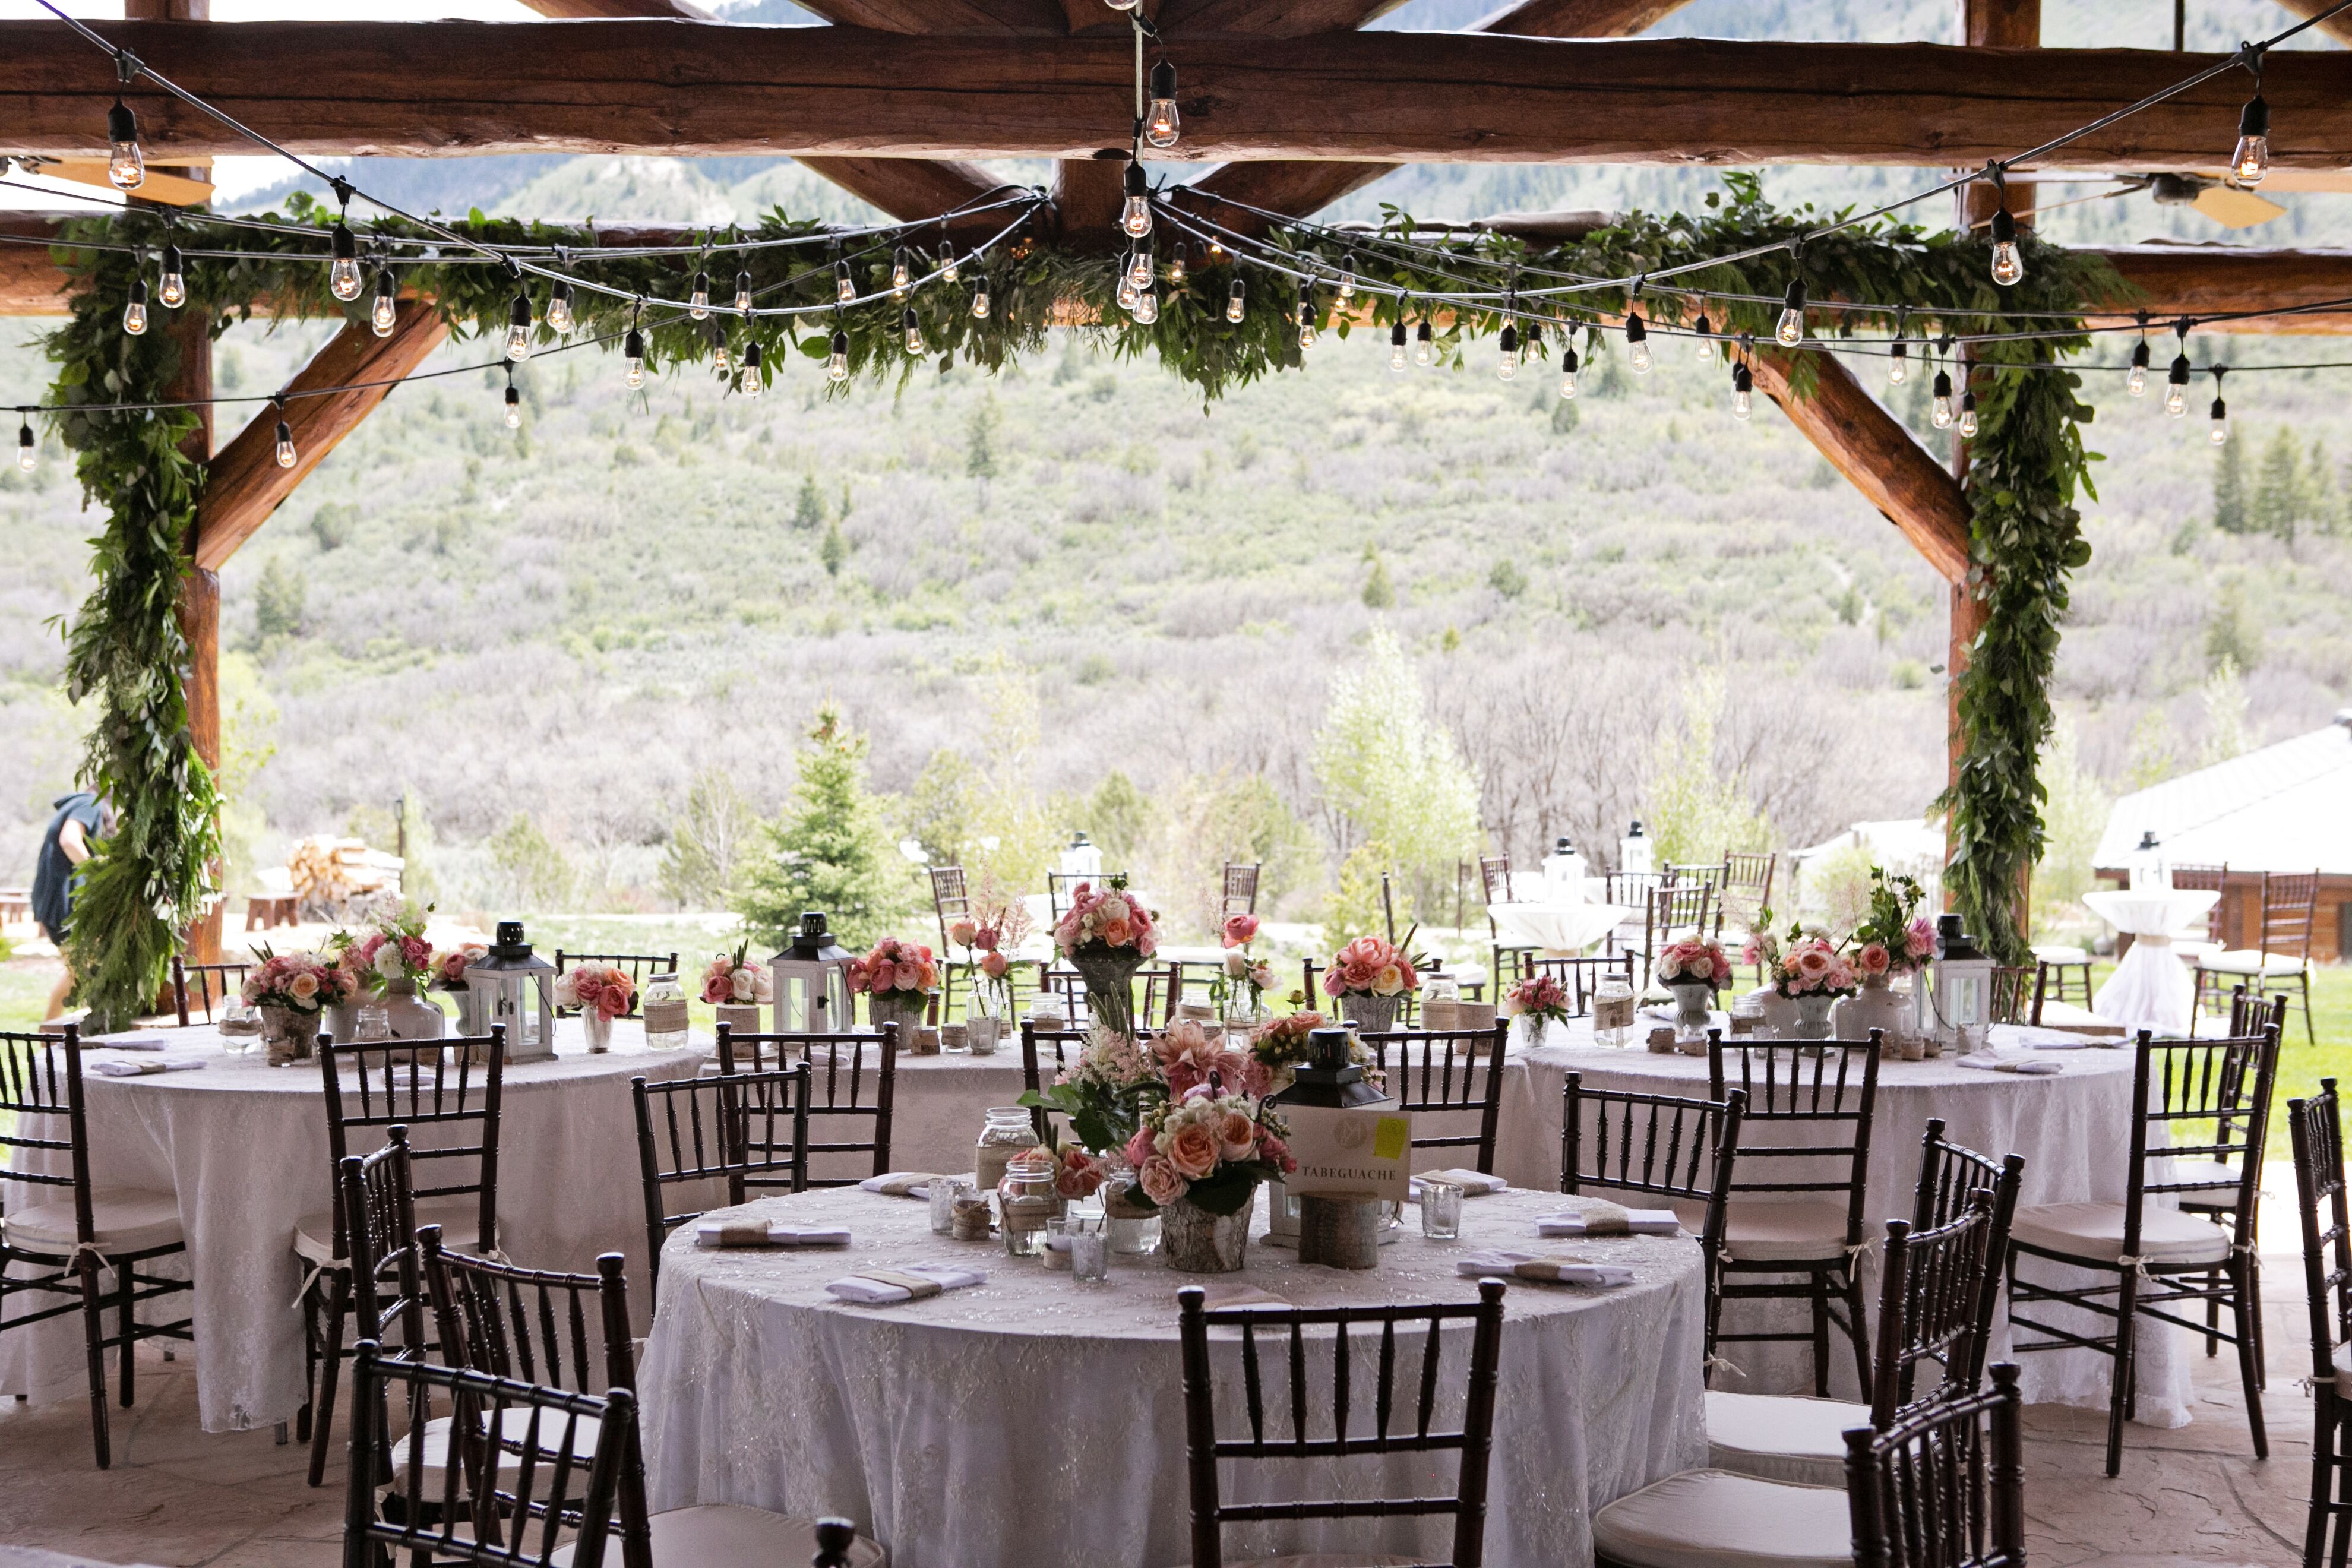 How to Throw a Modern Rustic Wedding – Rustic and Main